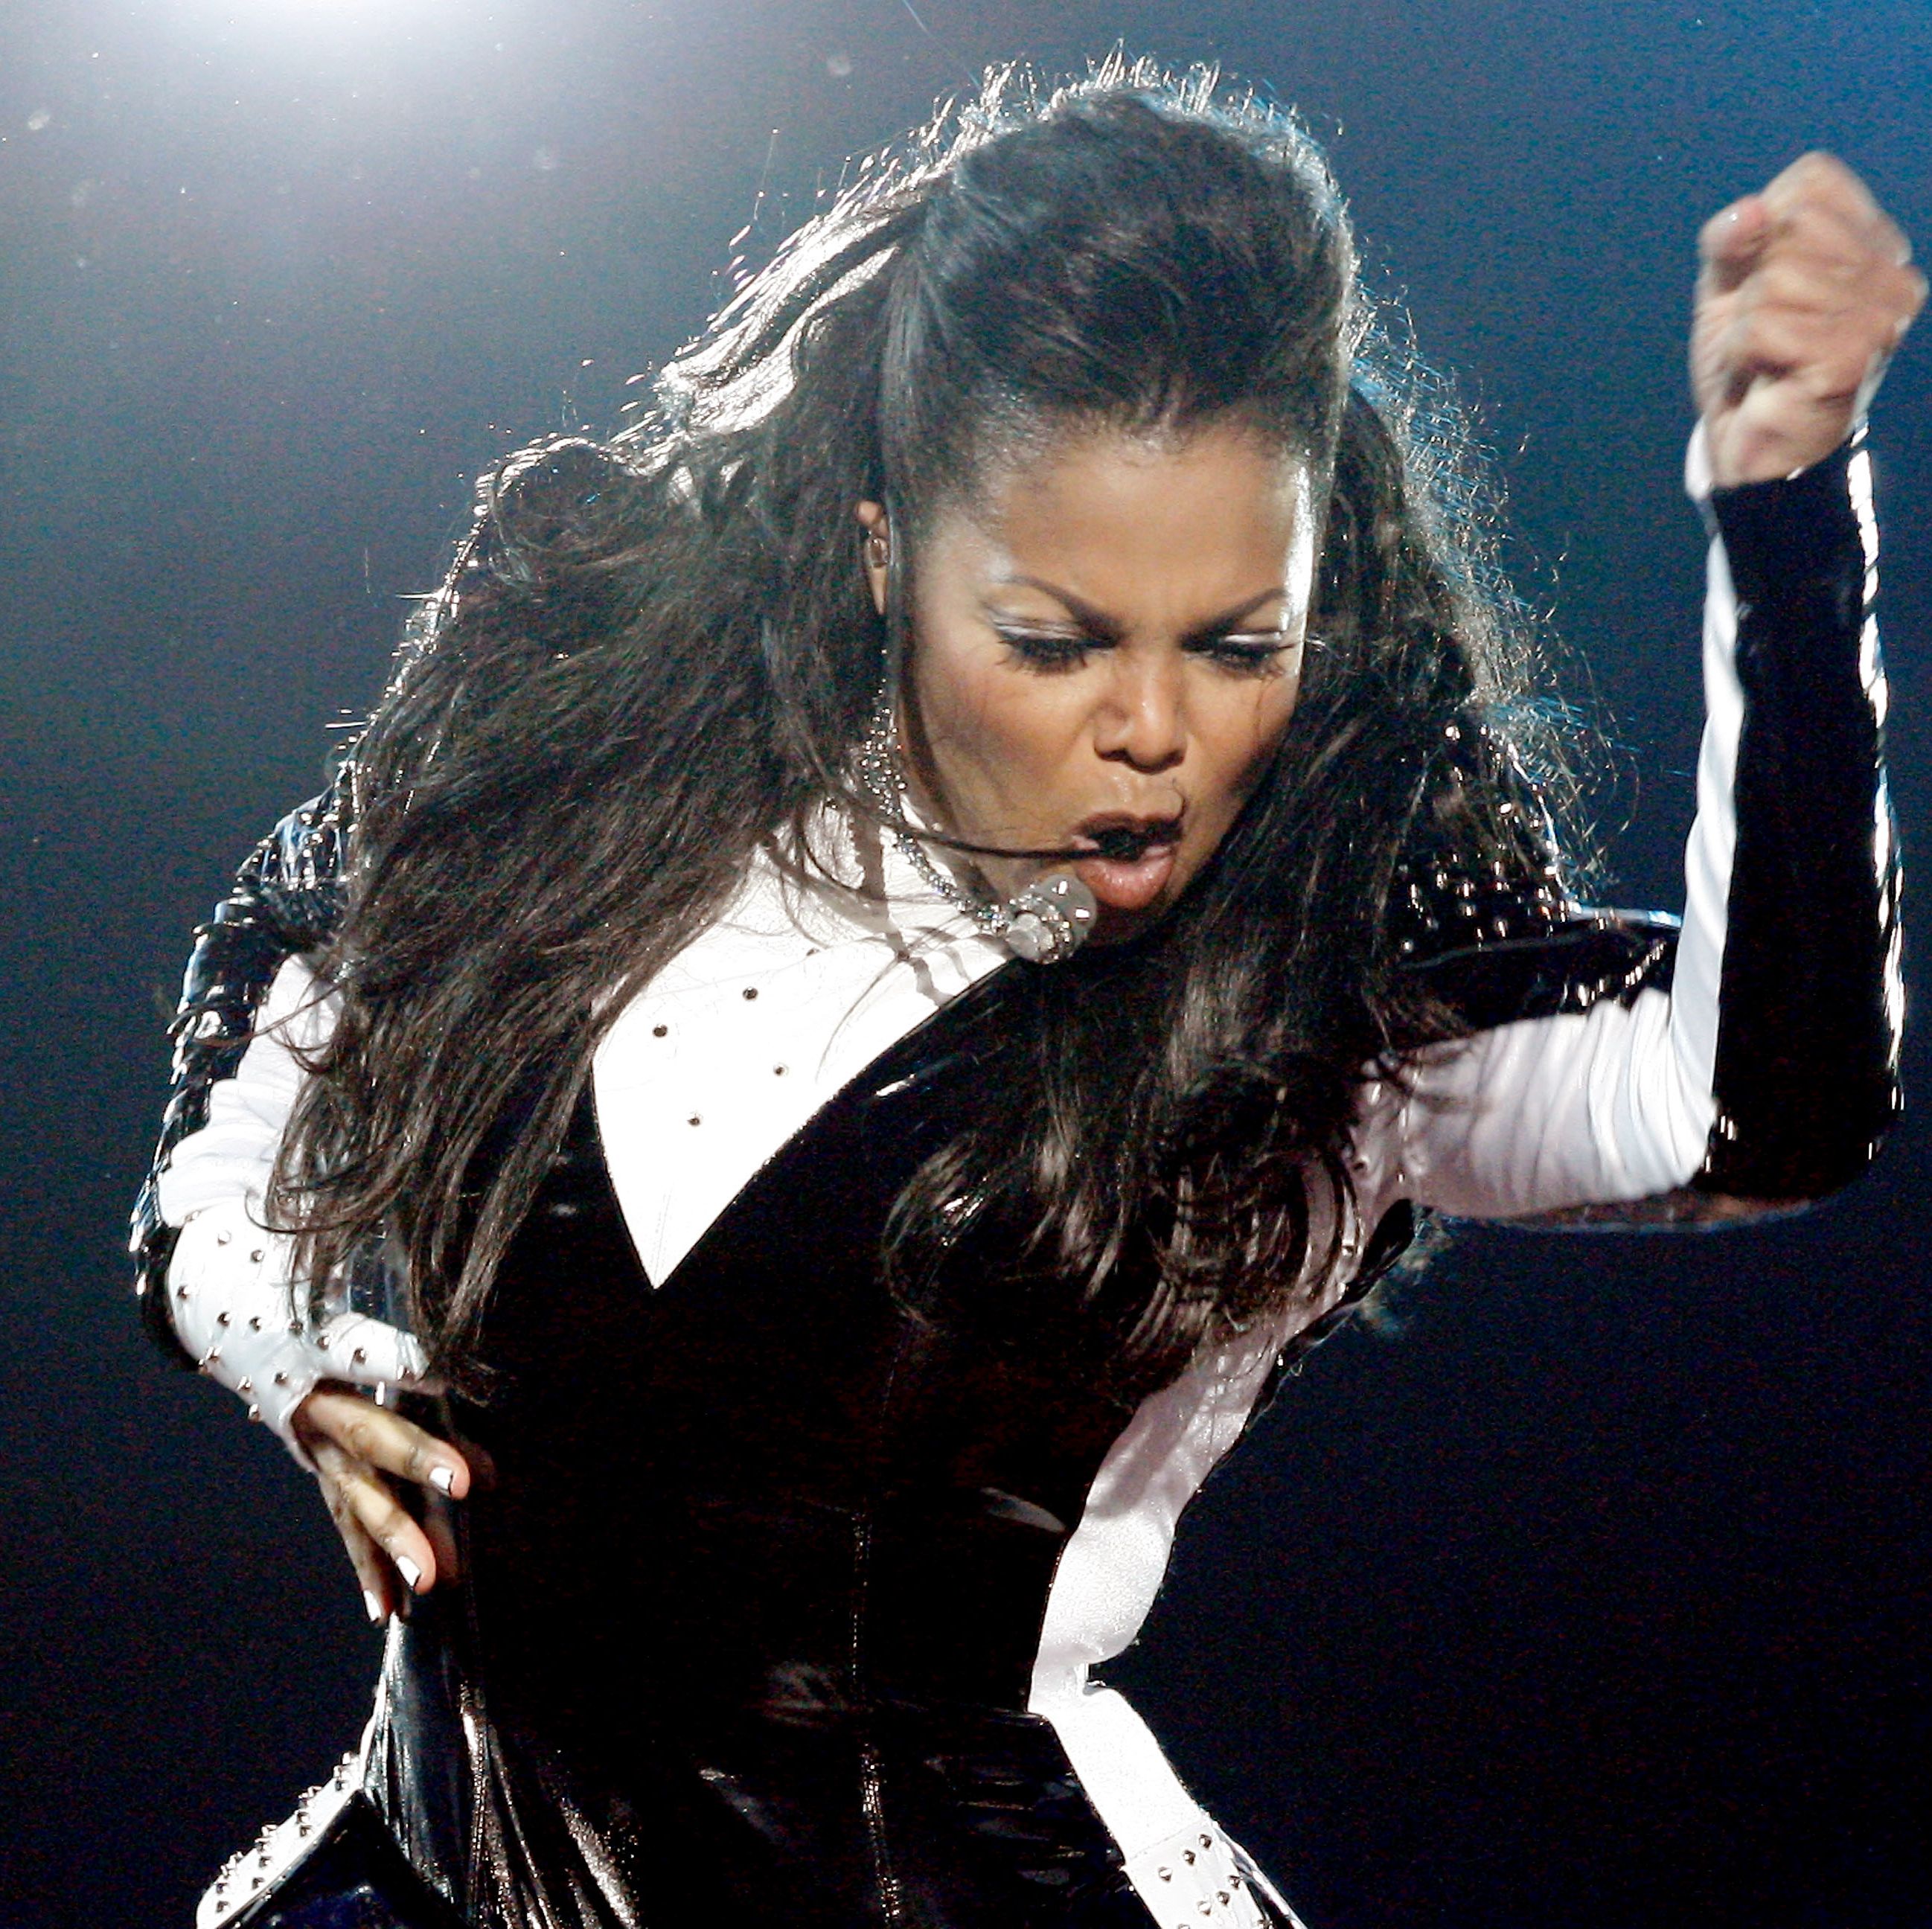 'Janet Jackson.' Is a Frustratingly Incomplete Portrait of a Pop Icon